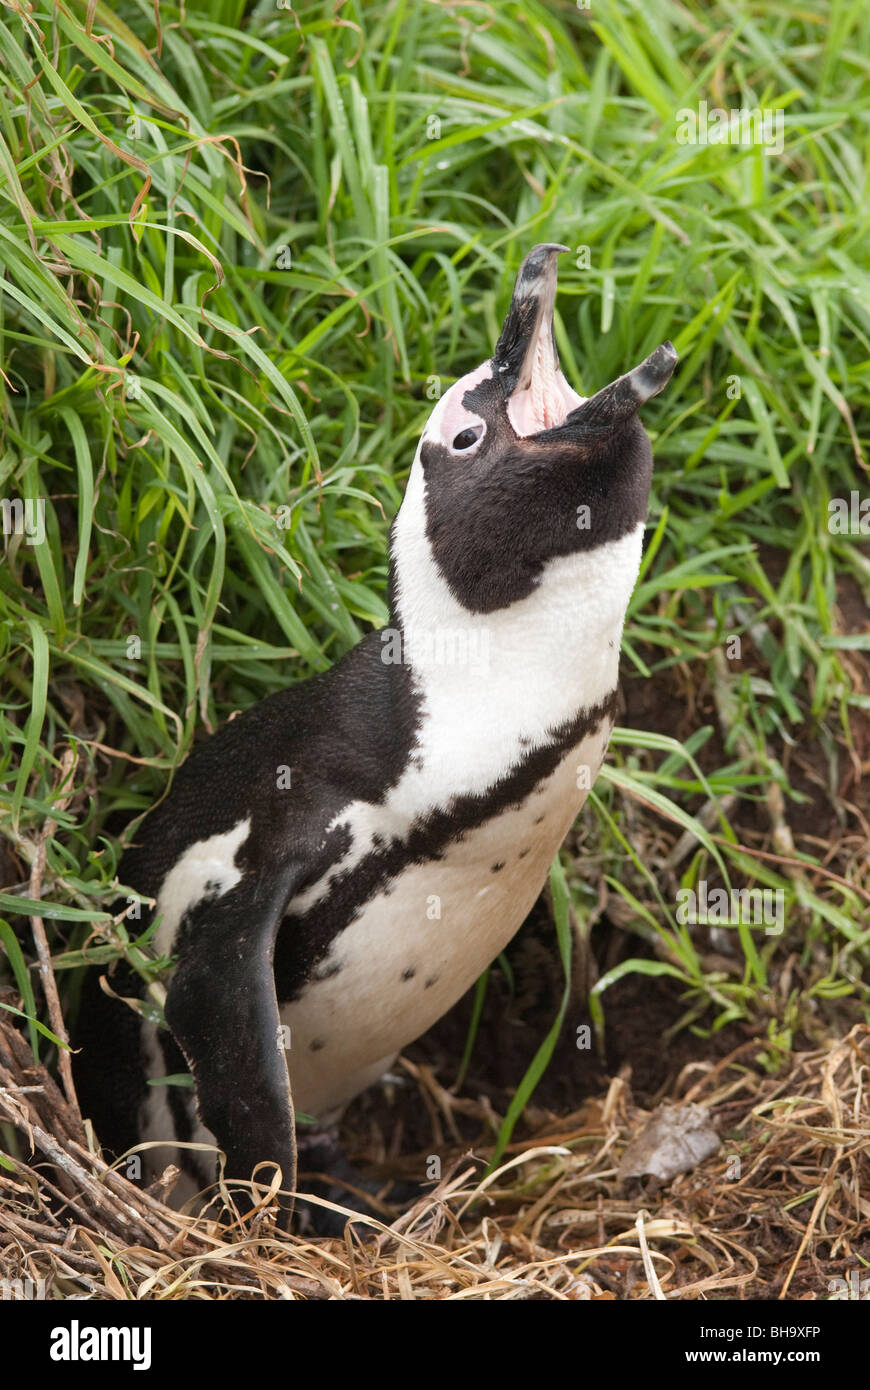 A nesting African penguin calling. Stock Photo